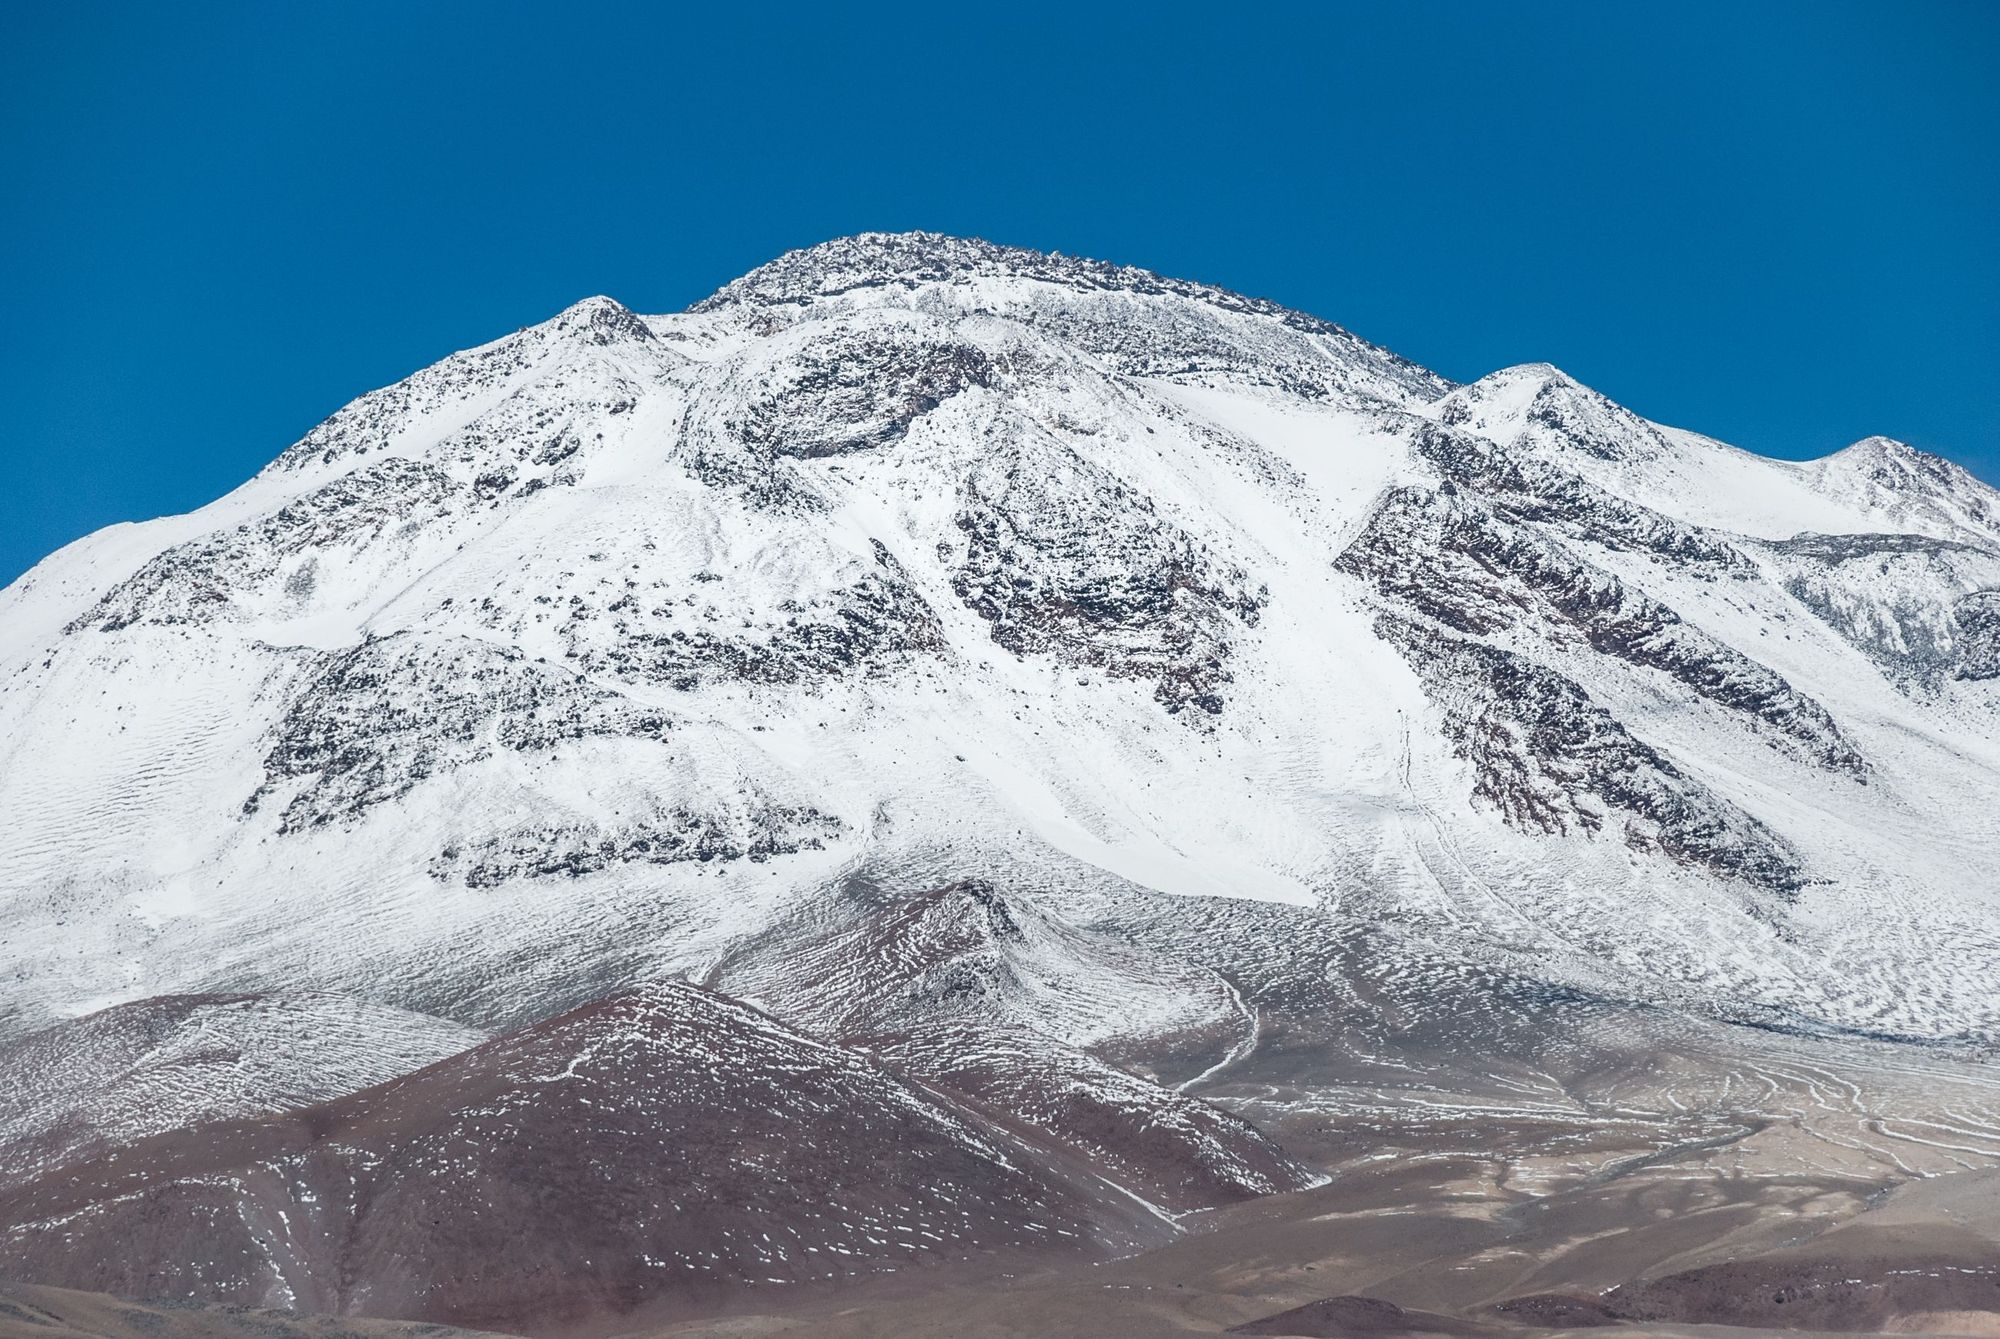 Nevado Tres Cruces or Tres Cruces Mountain, in Atacama, Chile, viewed from San Francisco pass to Catamarca province, Argentina. Photo: Getty